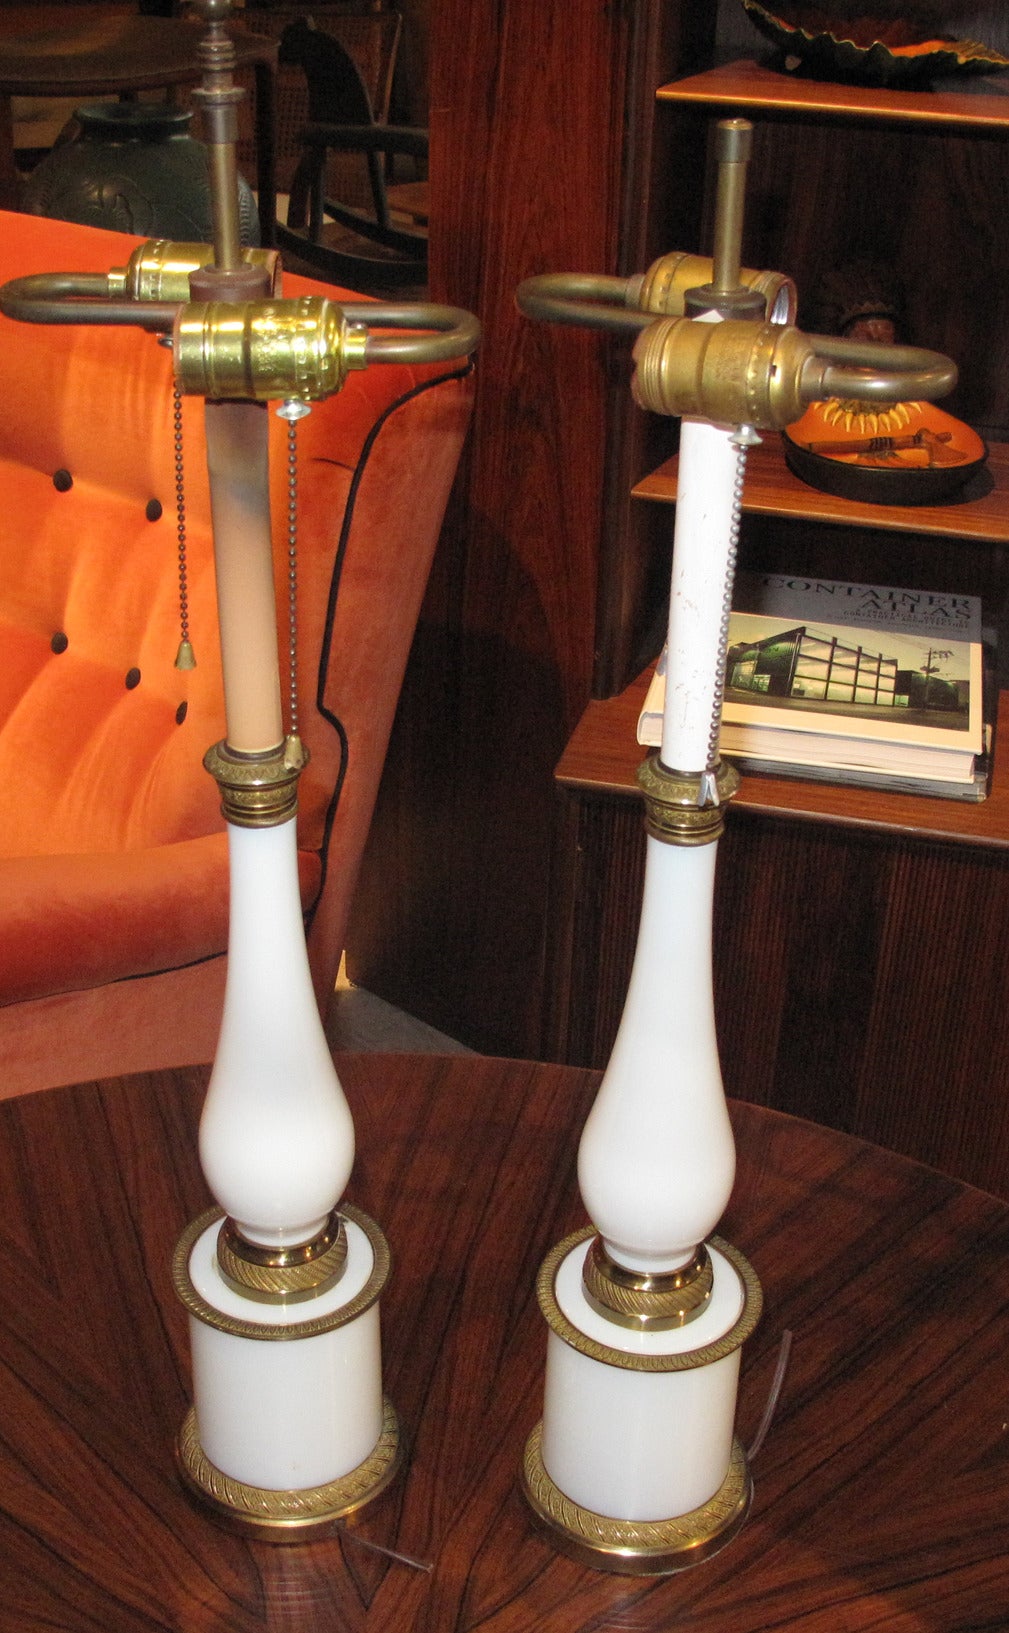 Pair of French 1820s gilt-metal and balustrade form opaline glass candlesticks adapted into lamps. Note: Measurement given is to top of finial, glass and gilt-metal part measures 16